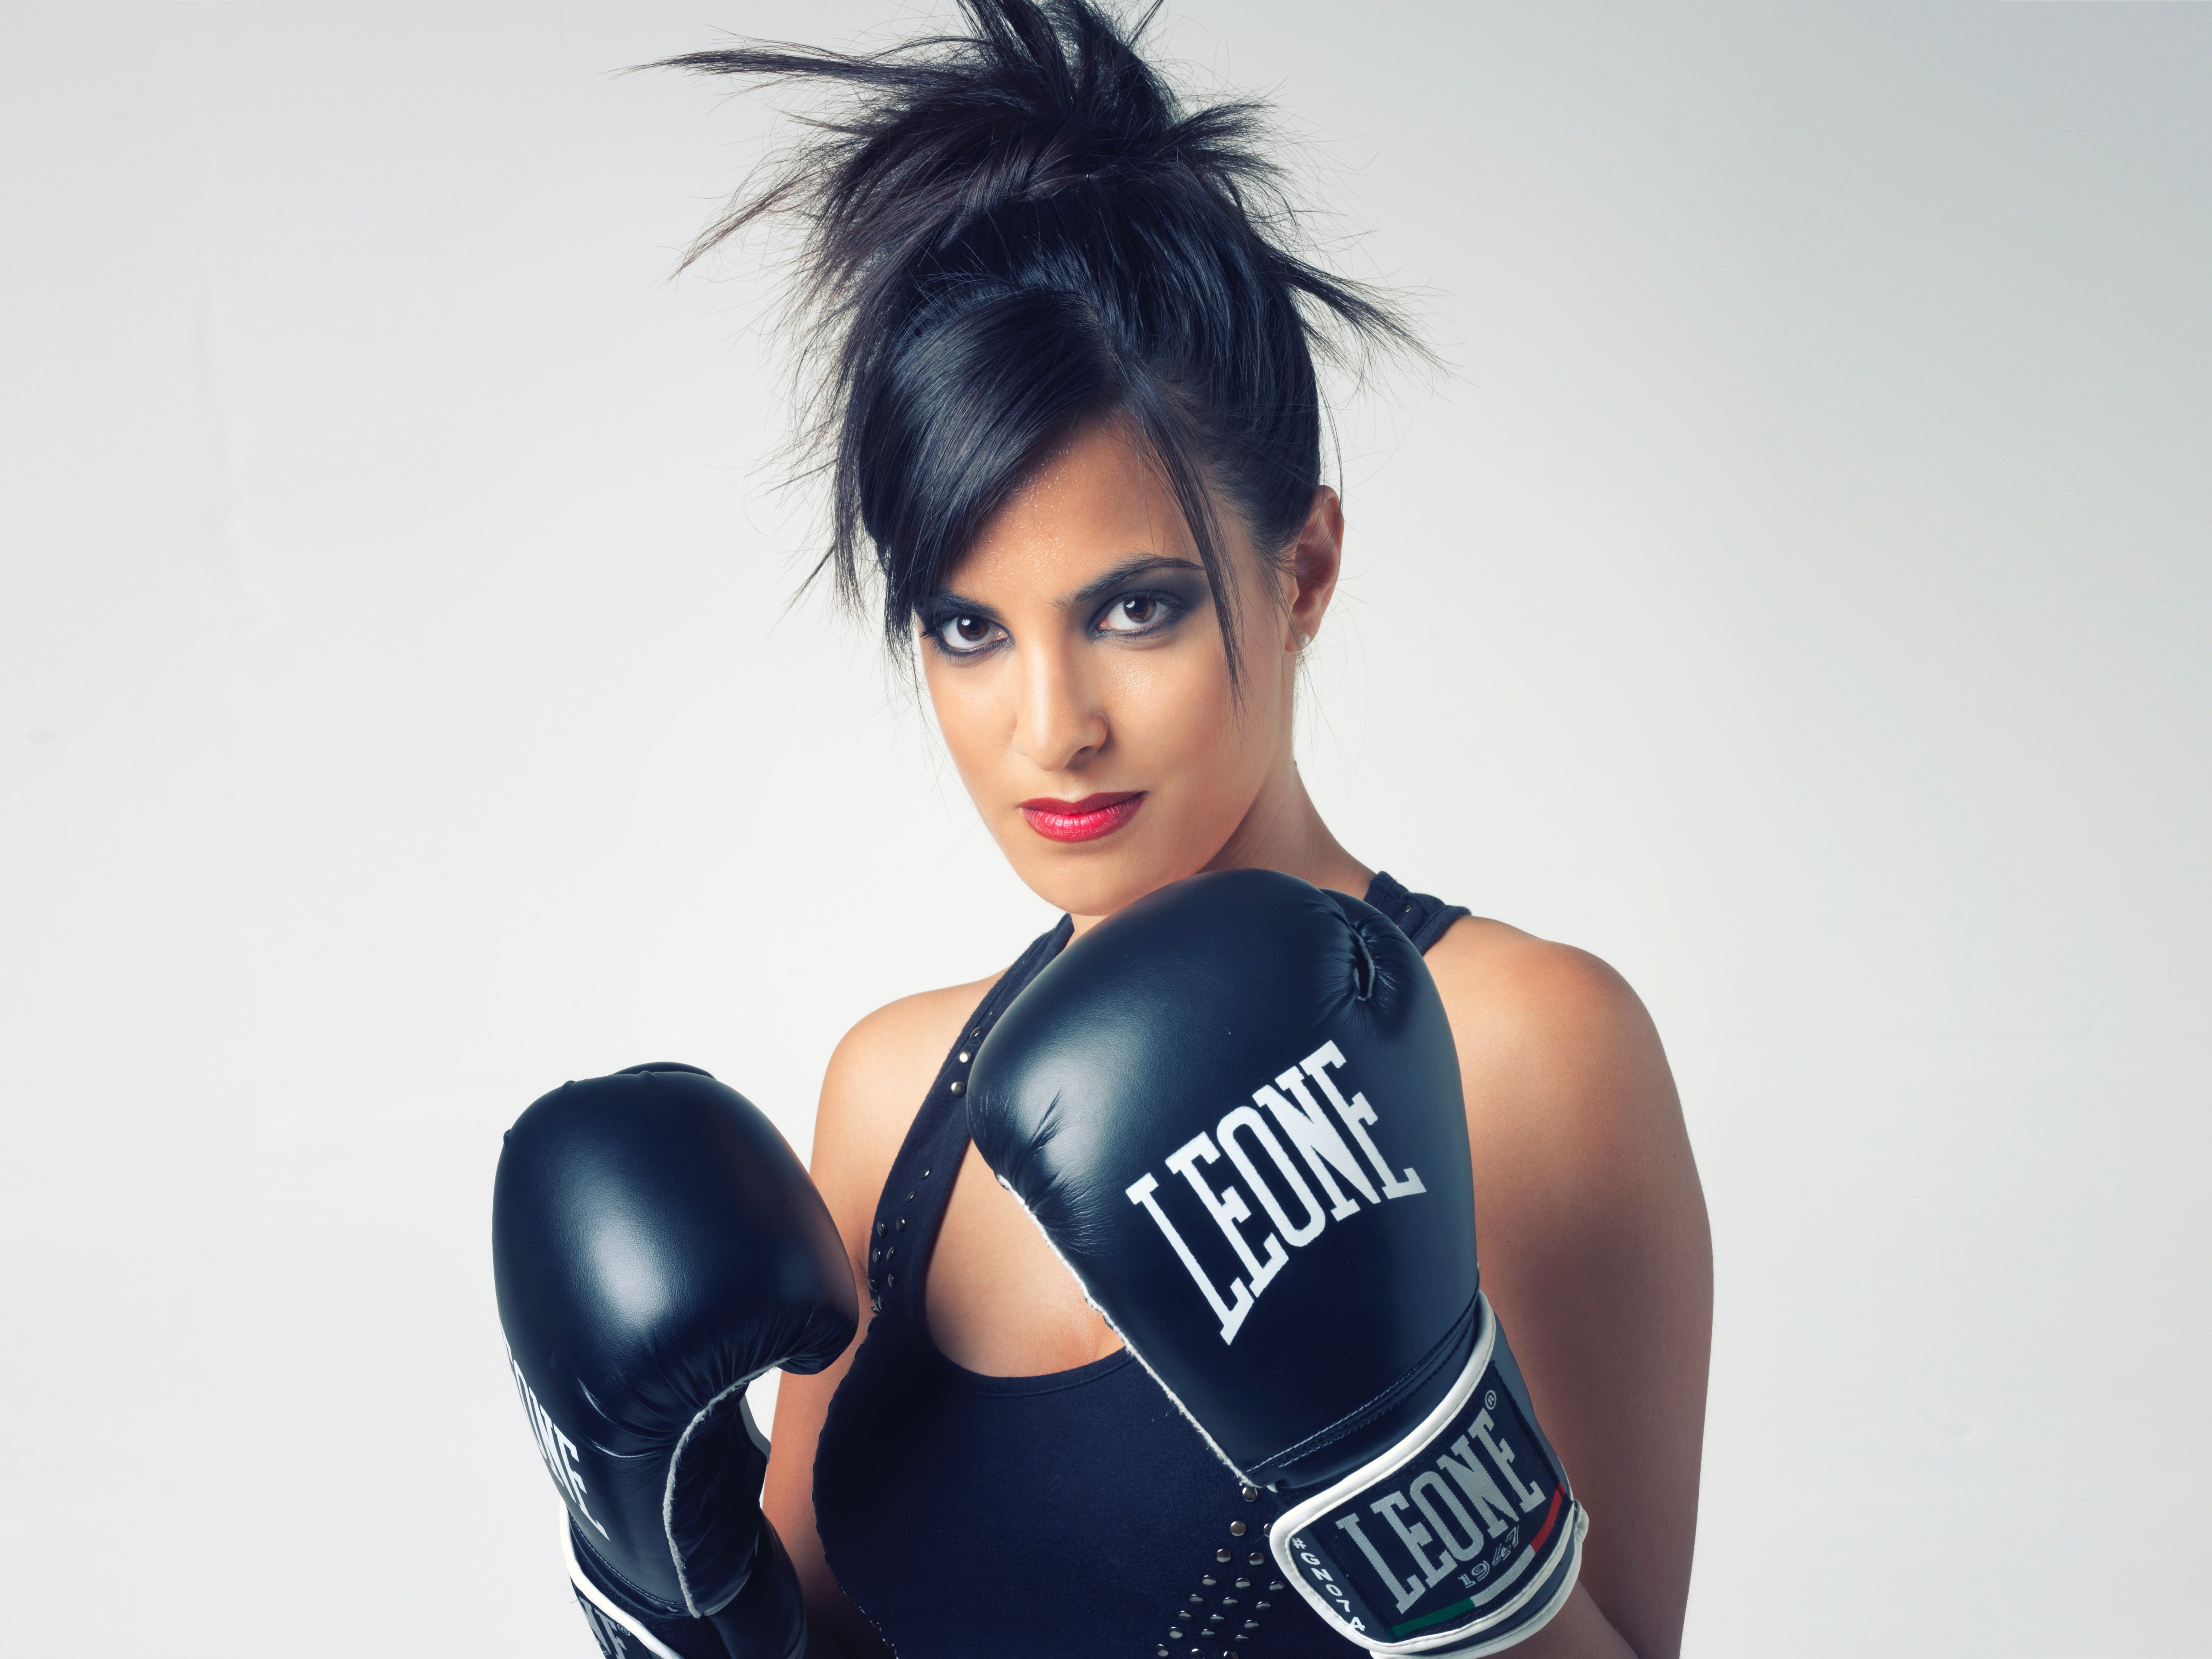 Girl Boxing Picture. Download Free Image